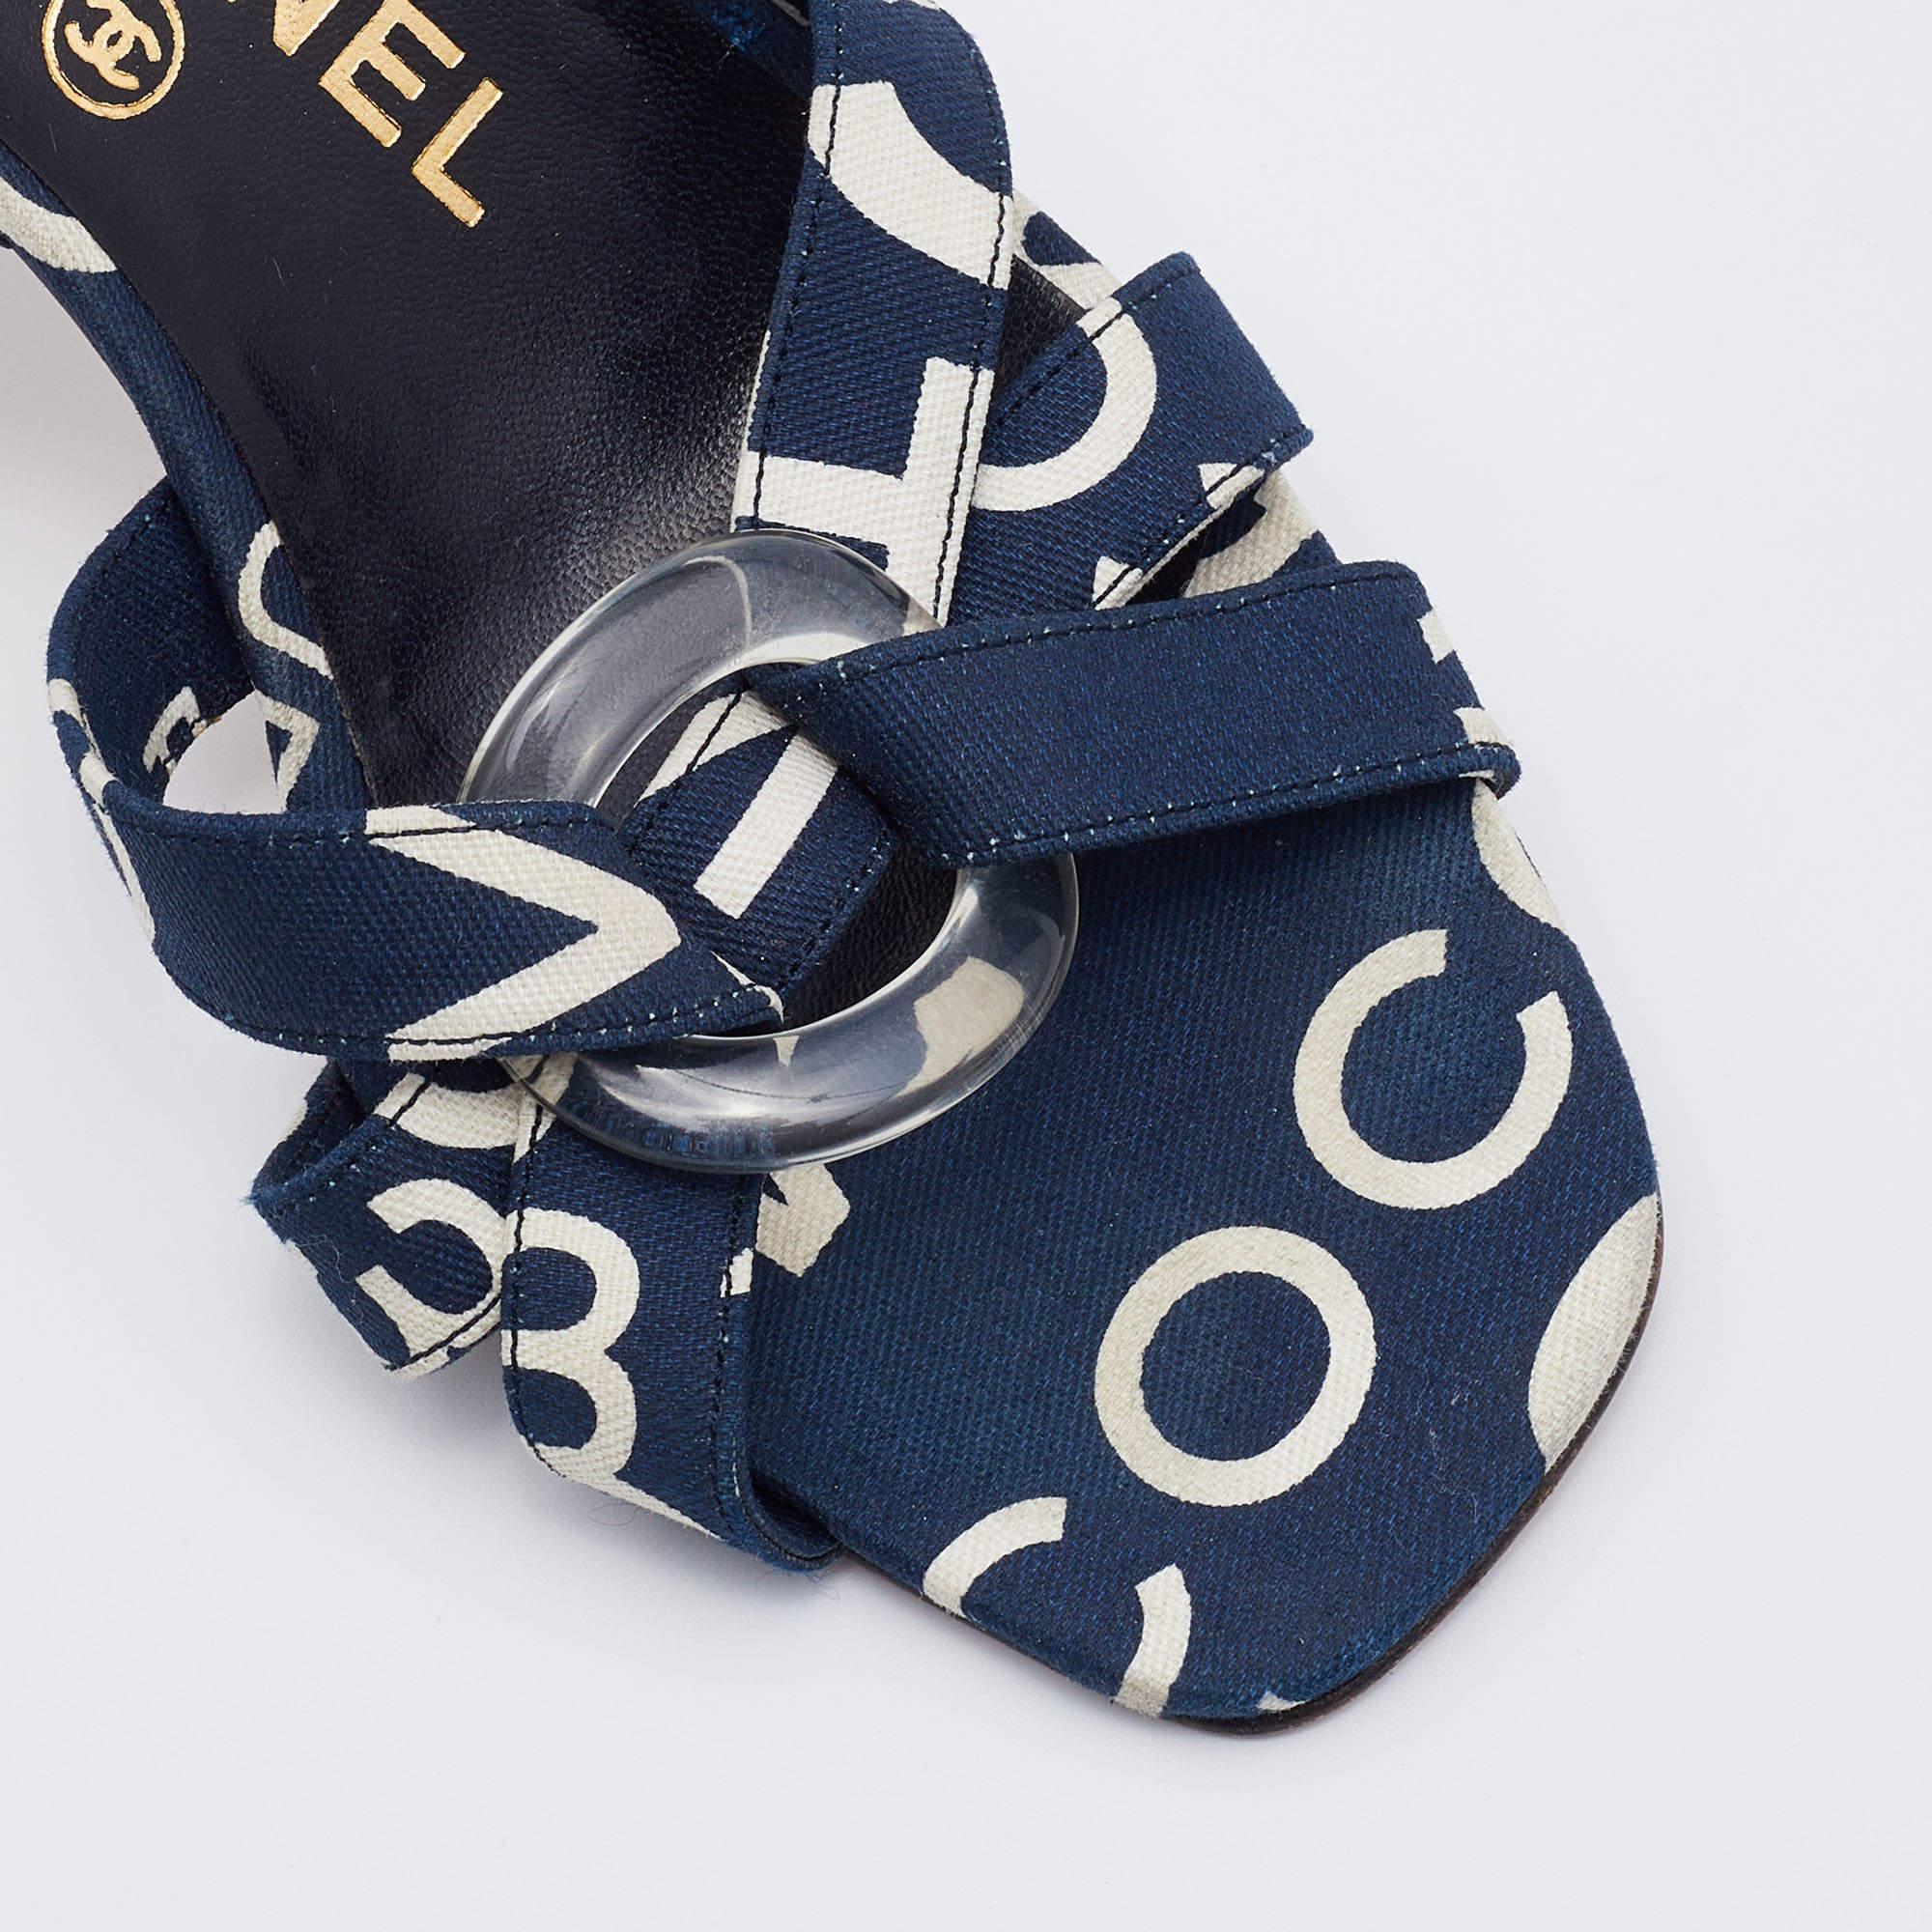 Chanel Blue/White Printed Canvas Slingback Sandals Size 37 1